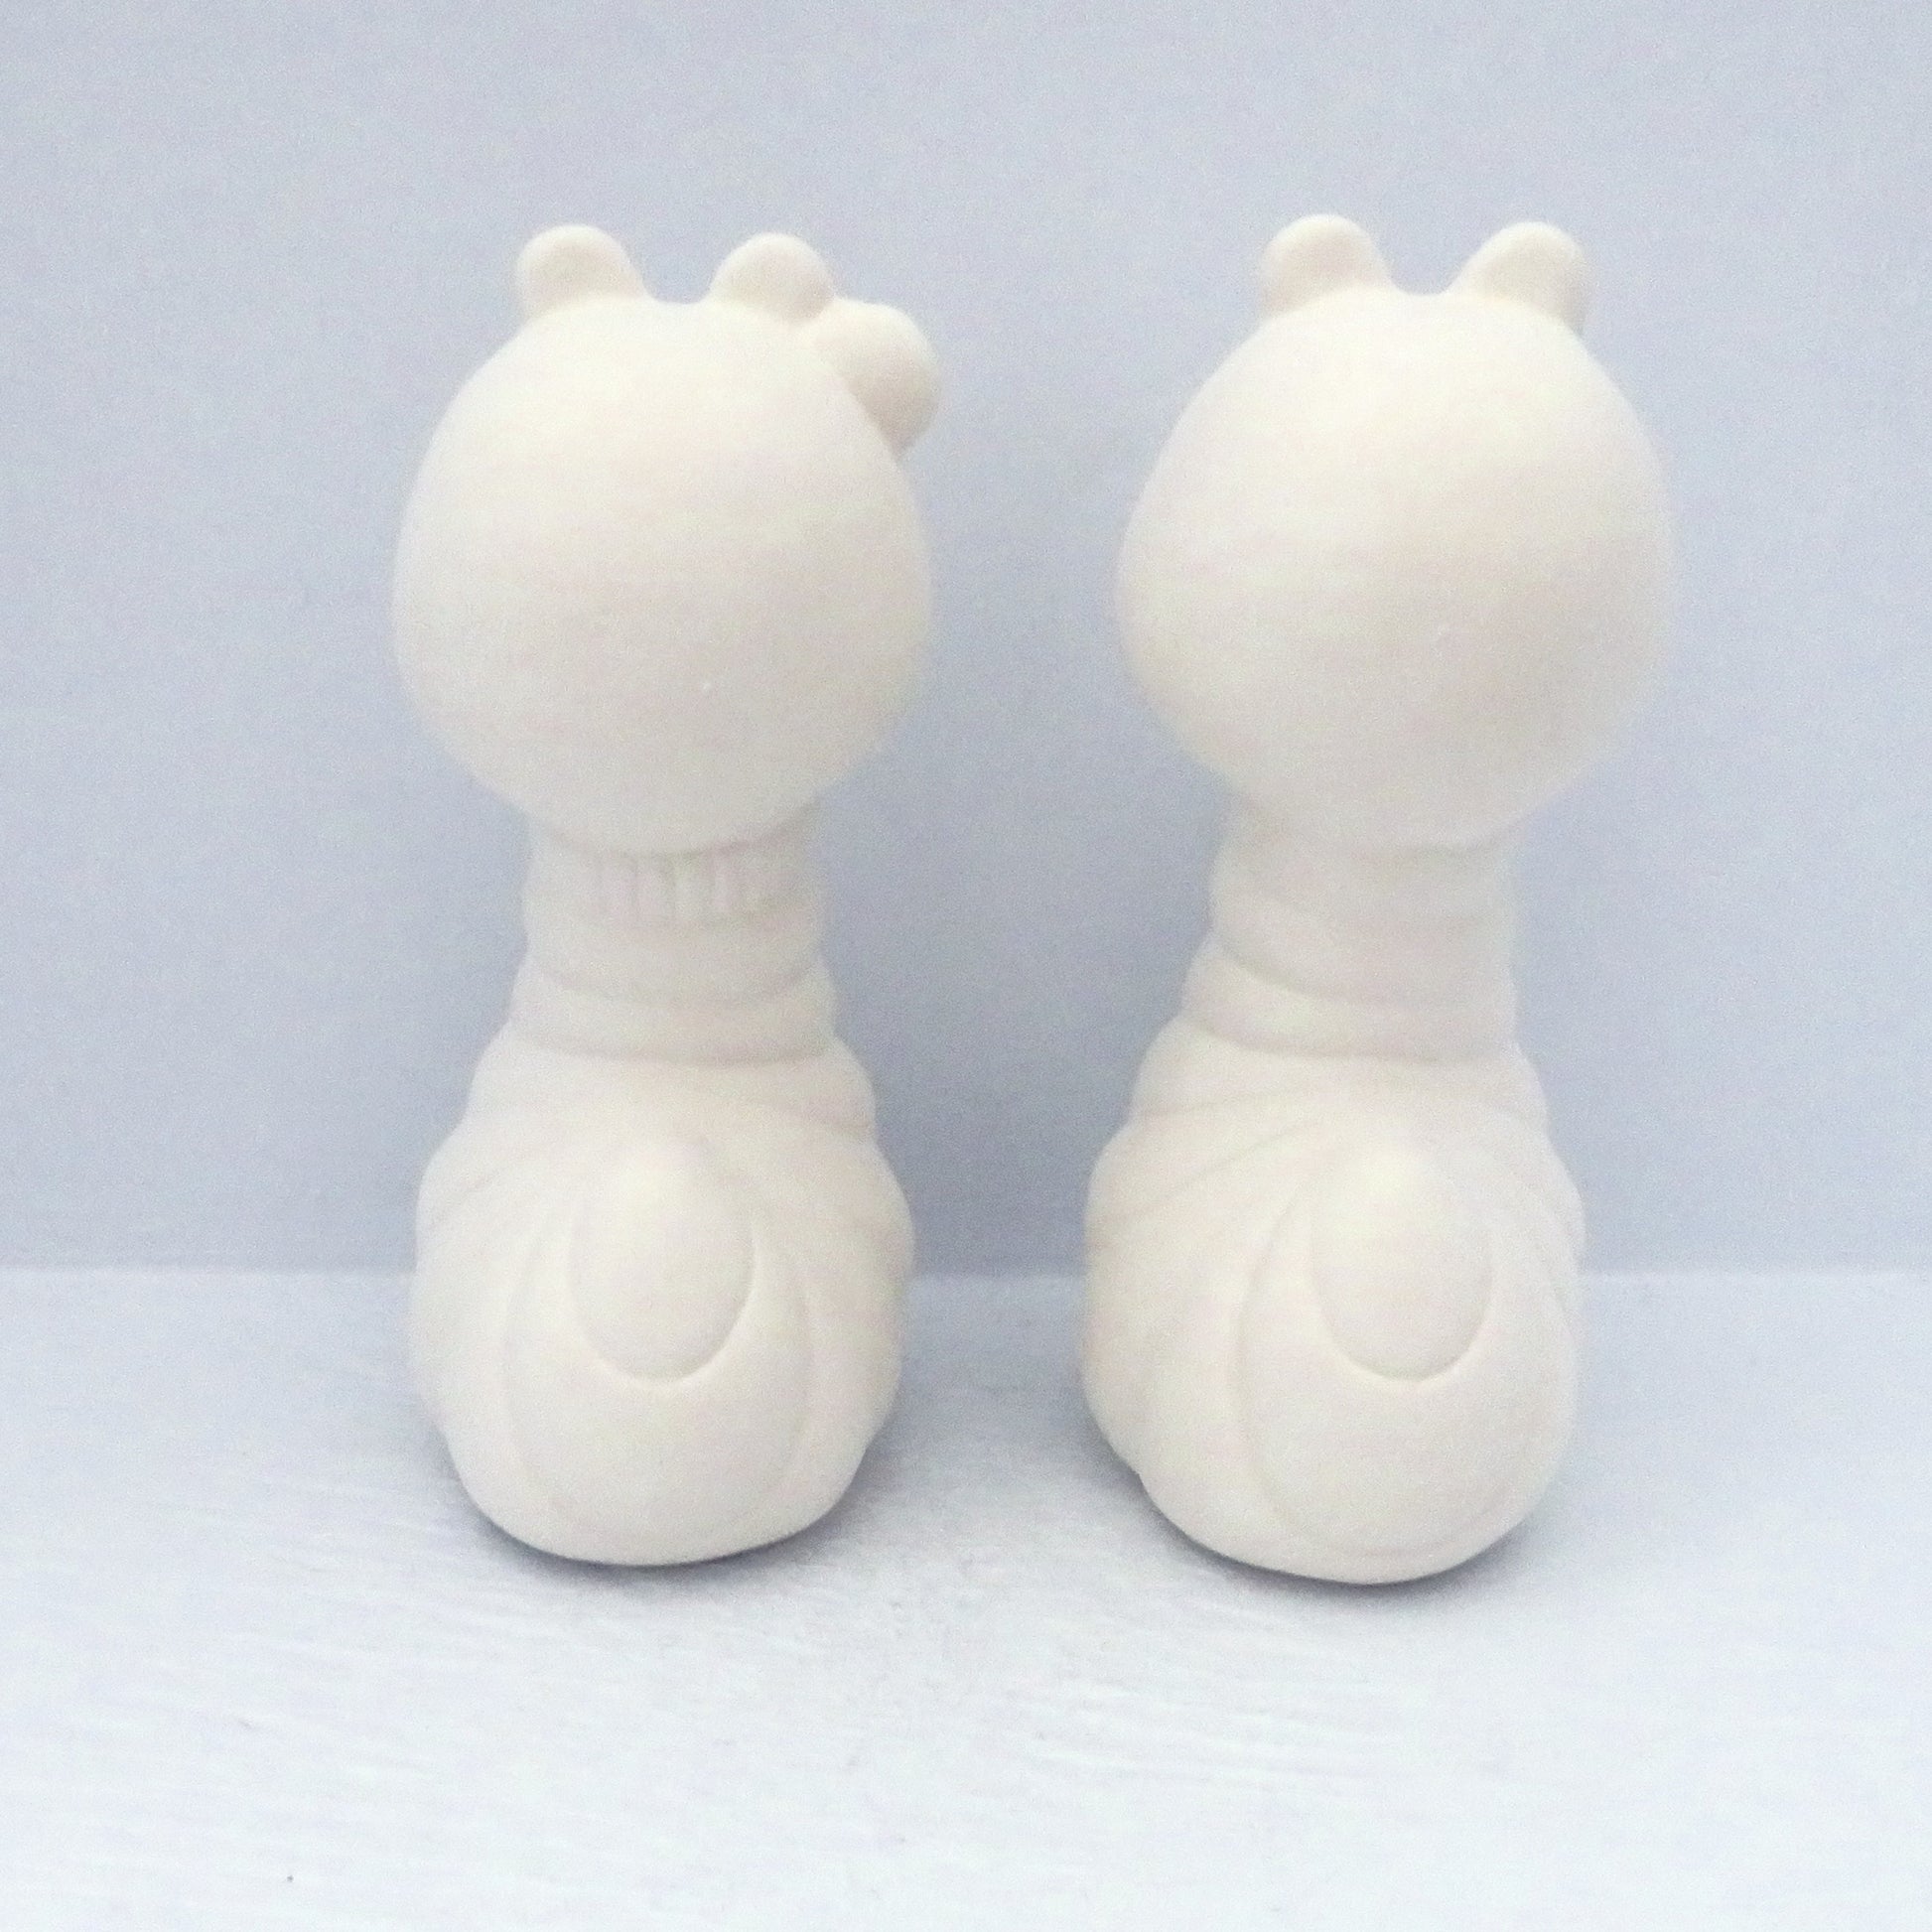 2 paintable ceramic bug figurines back view on a pale blue background